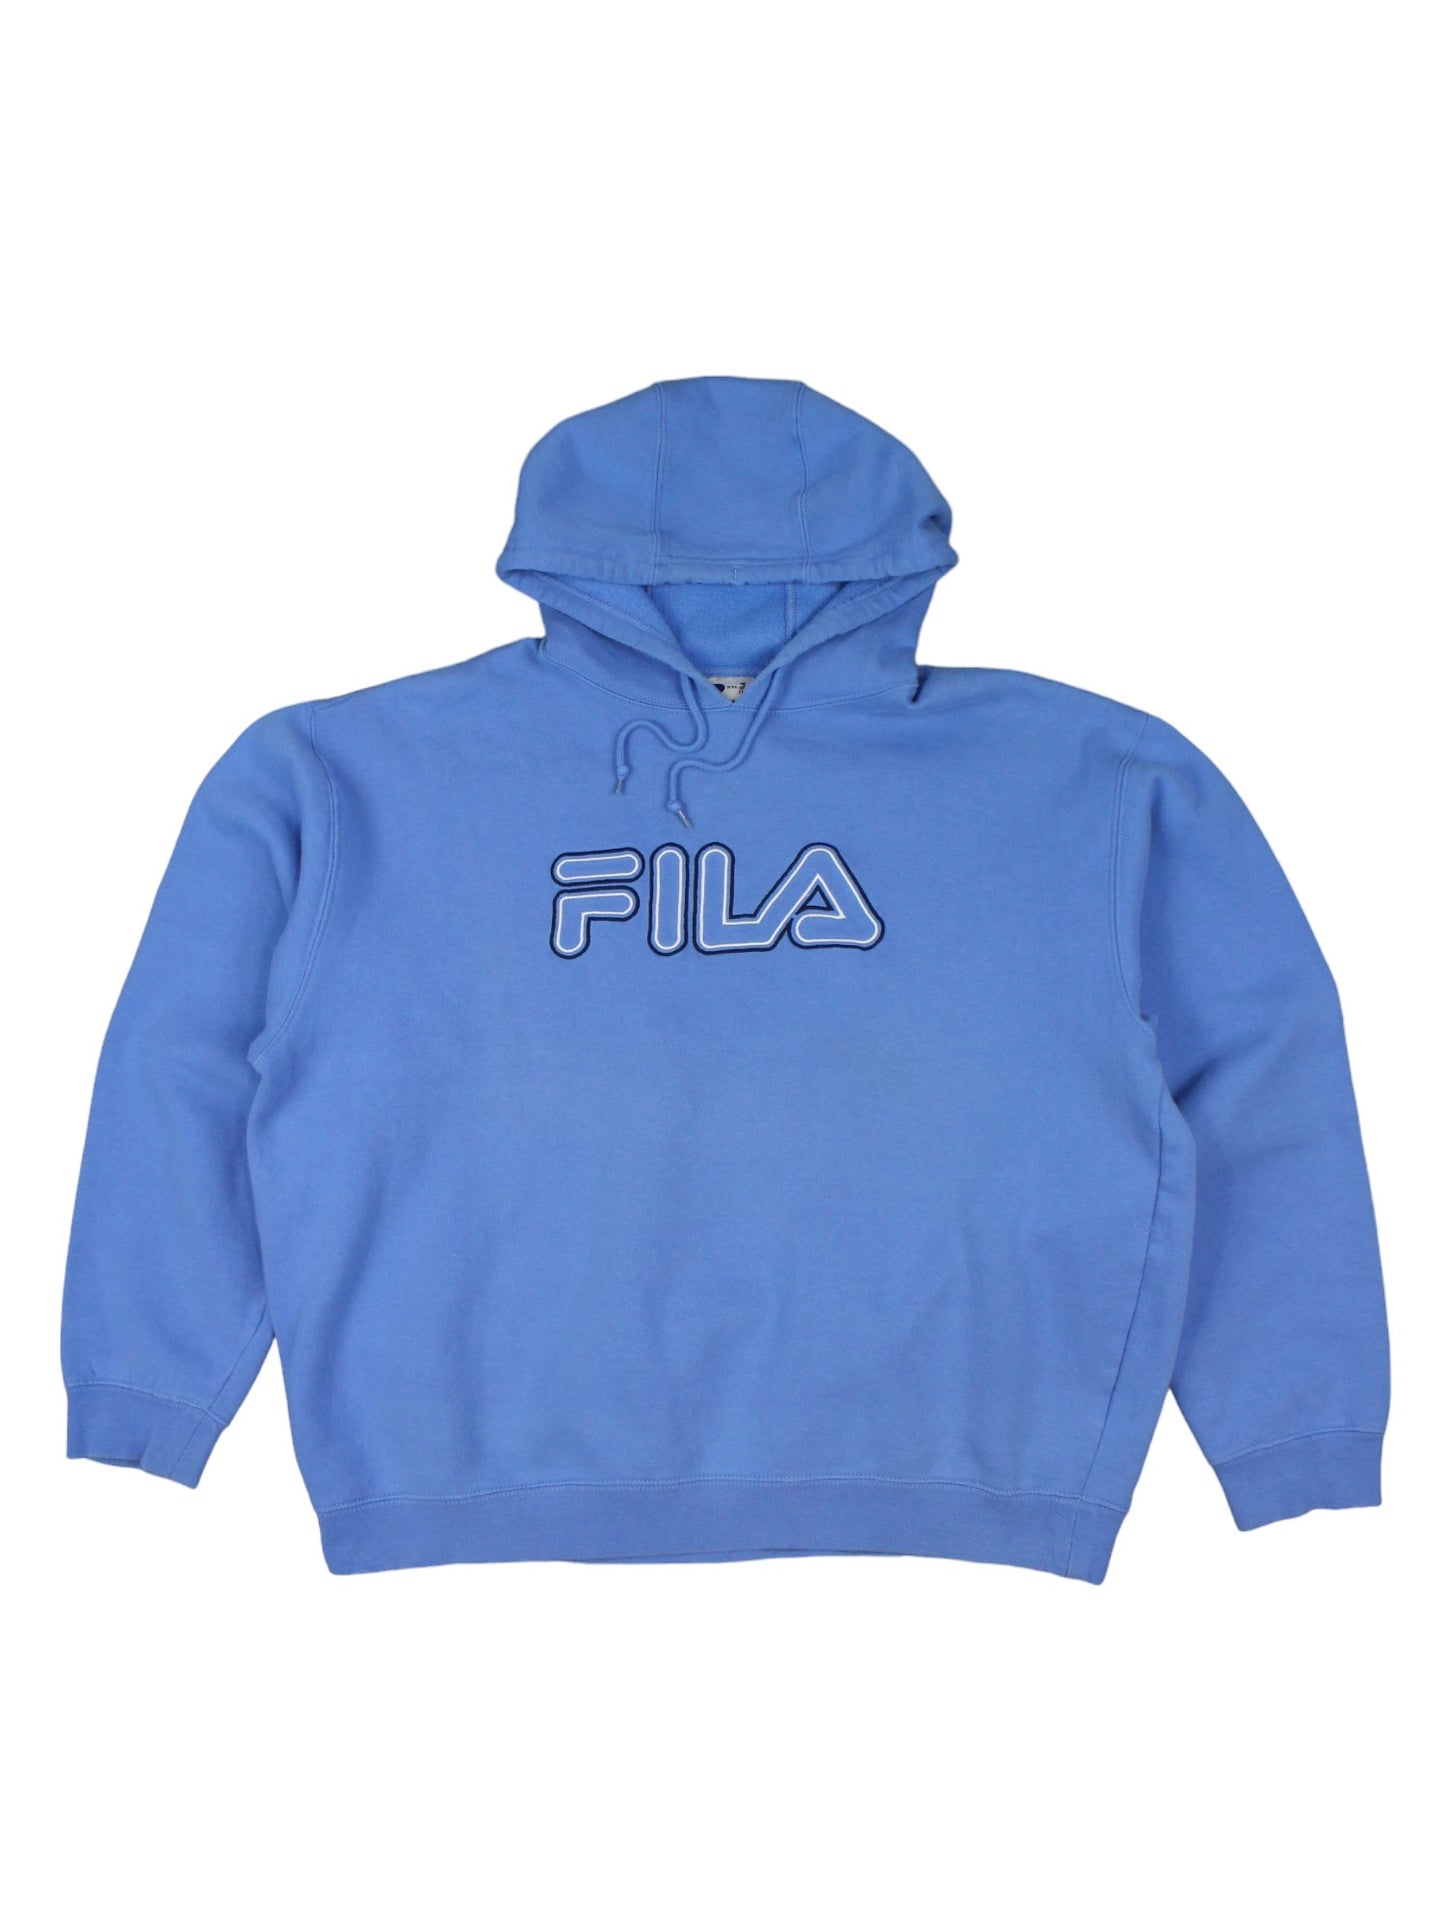 00s Fila Blue Embroidered Hoodie (XL)